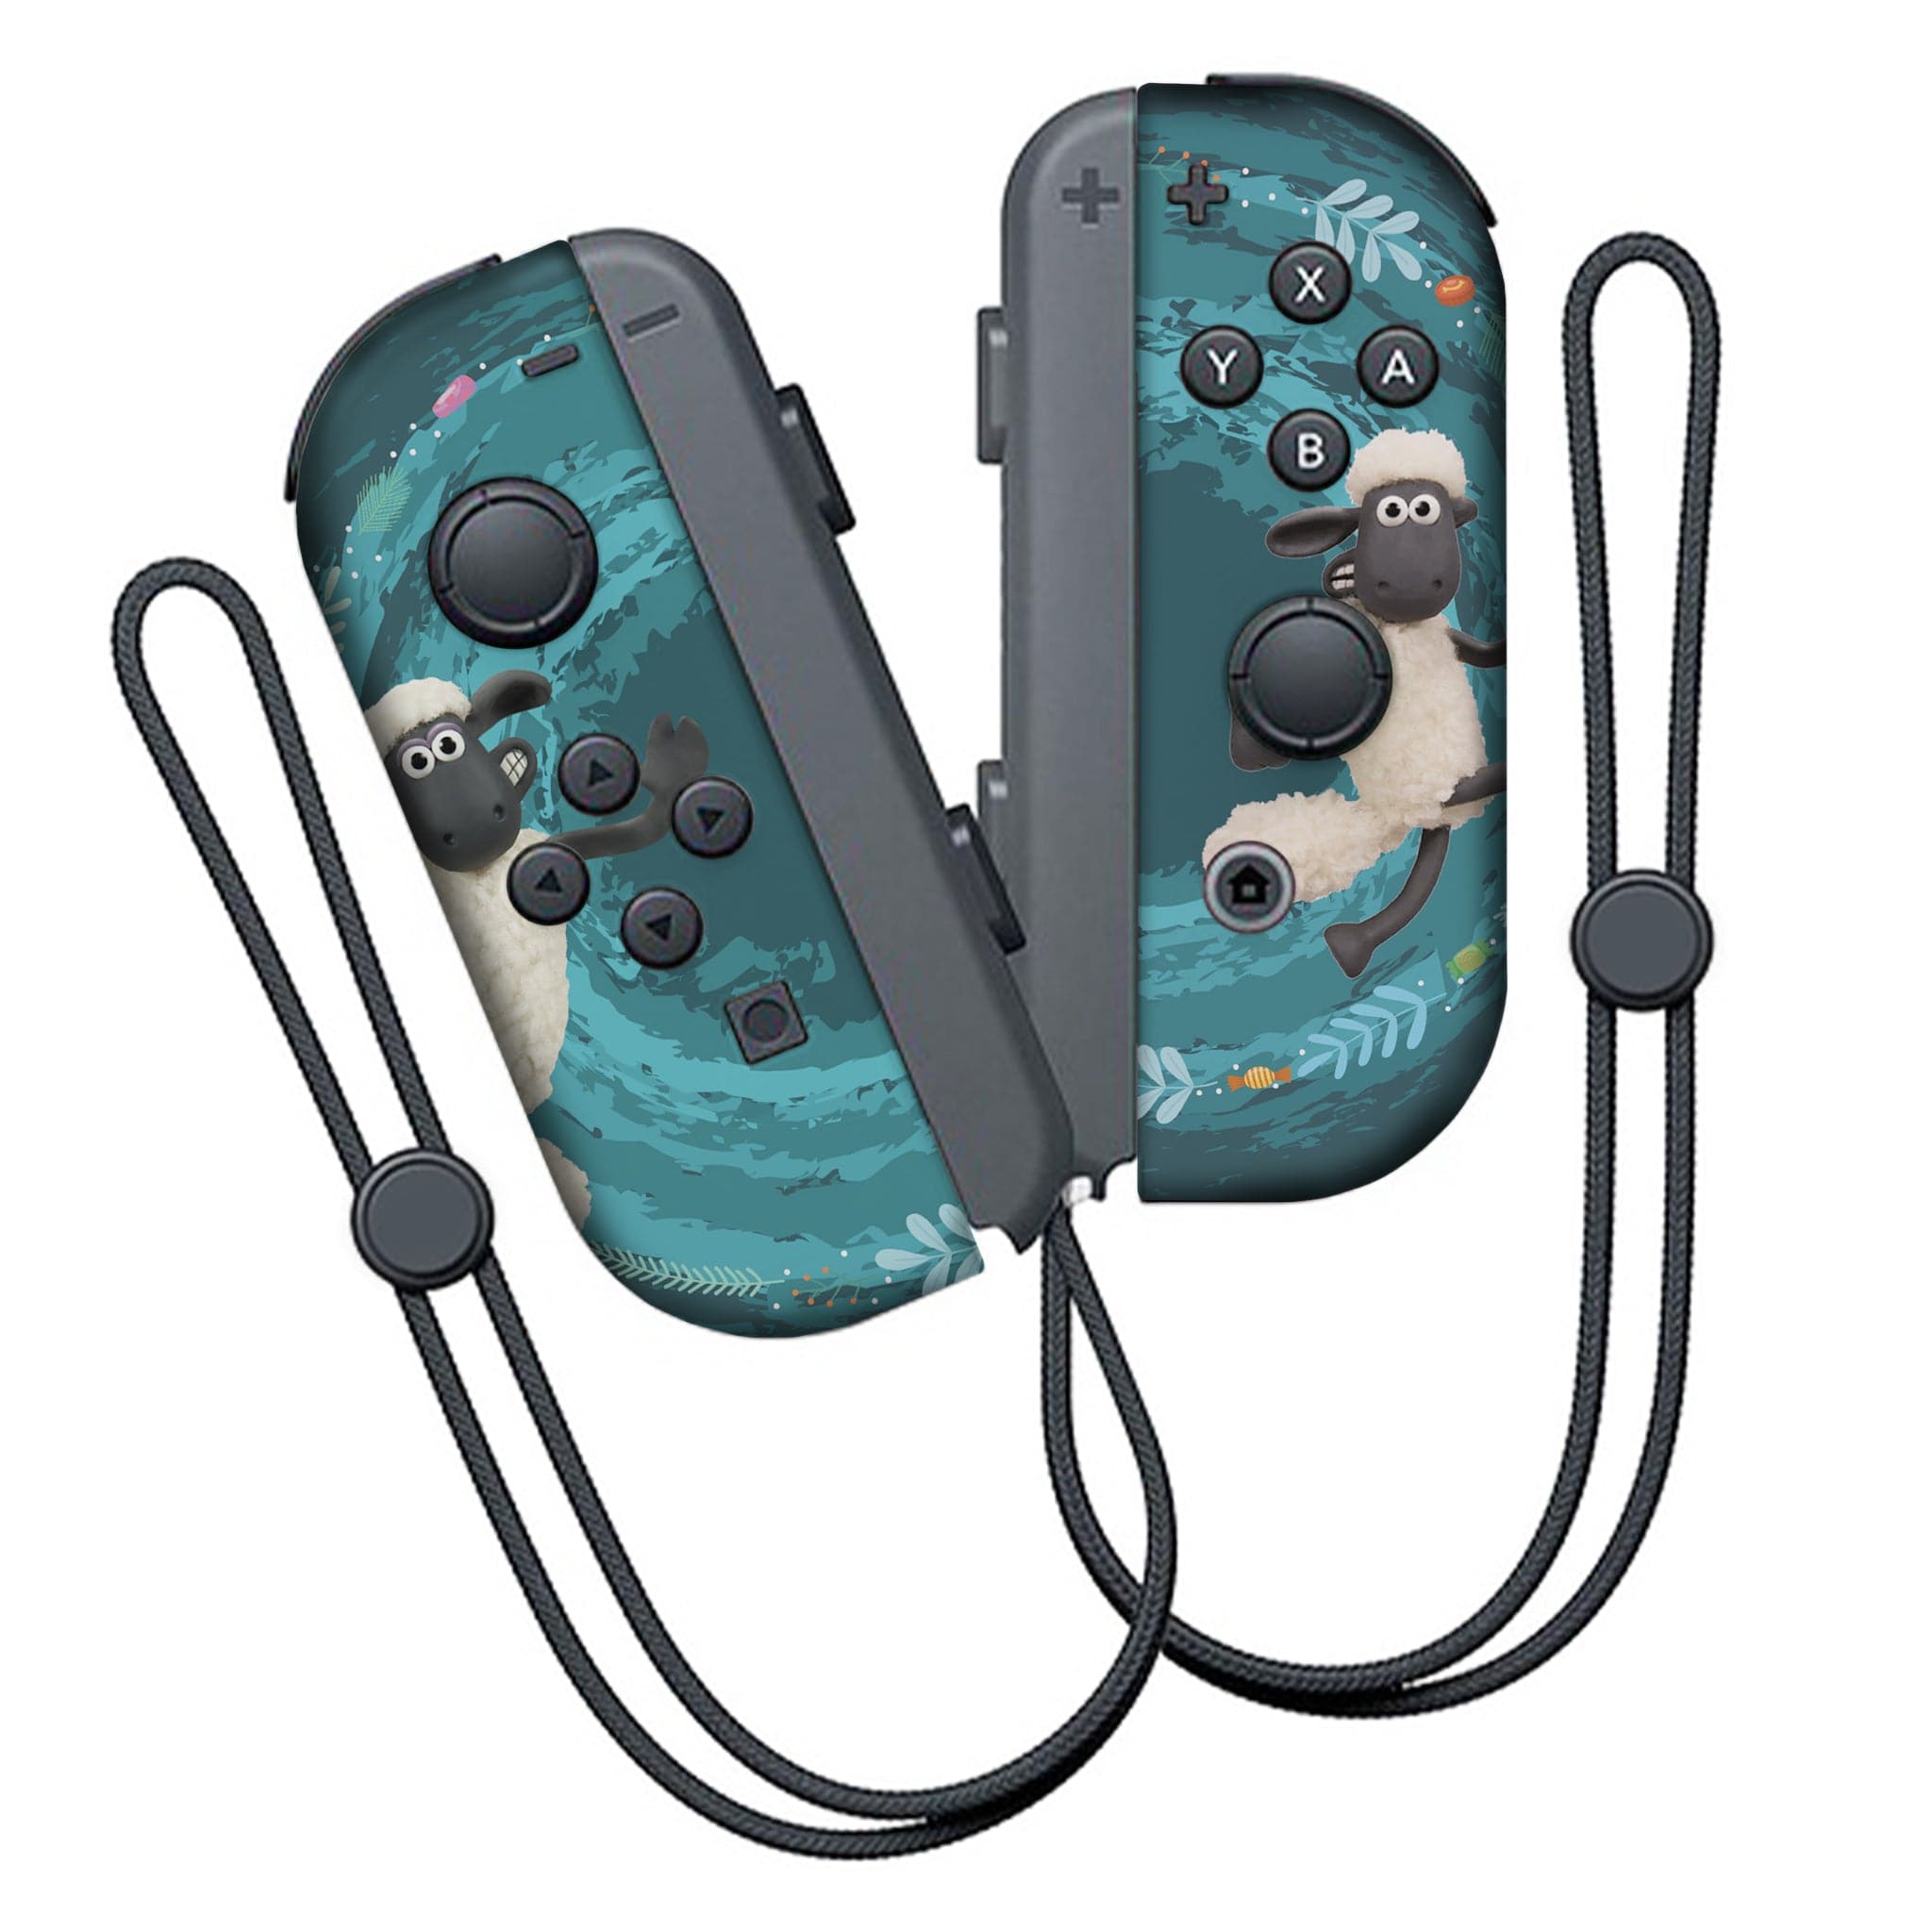 Shaun the Sheep Joy-Con L & R Switch Controllers | Switch Lite